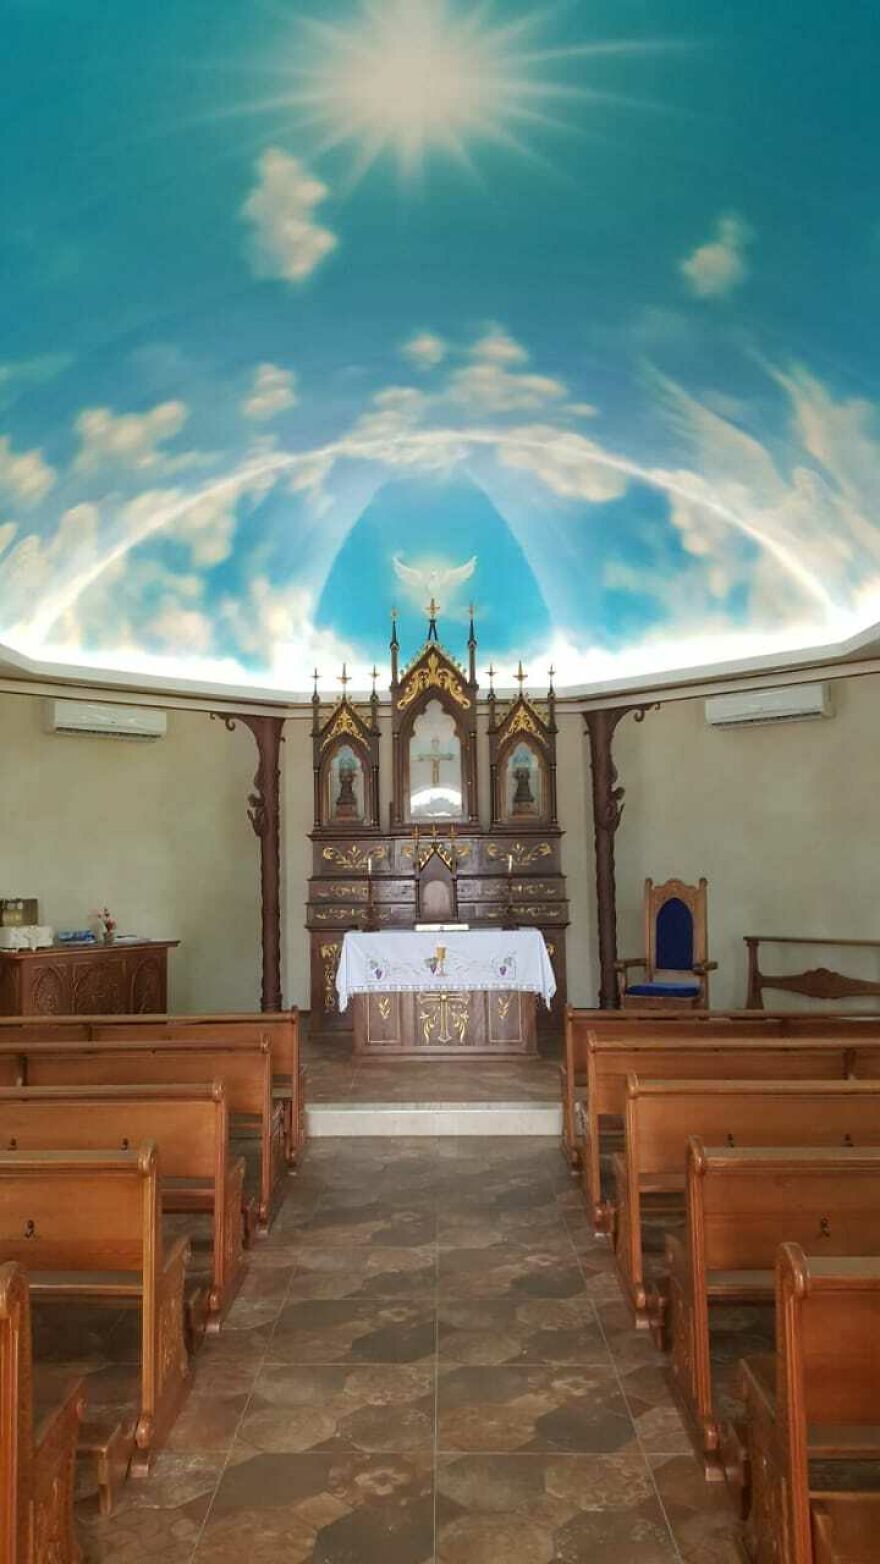 Found An Unique Church? Share With Us!